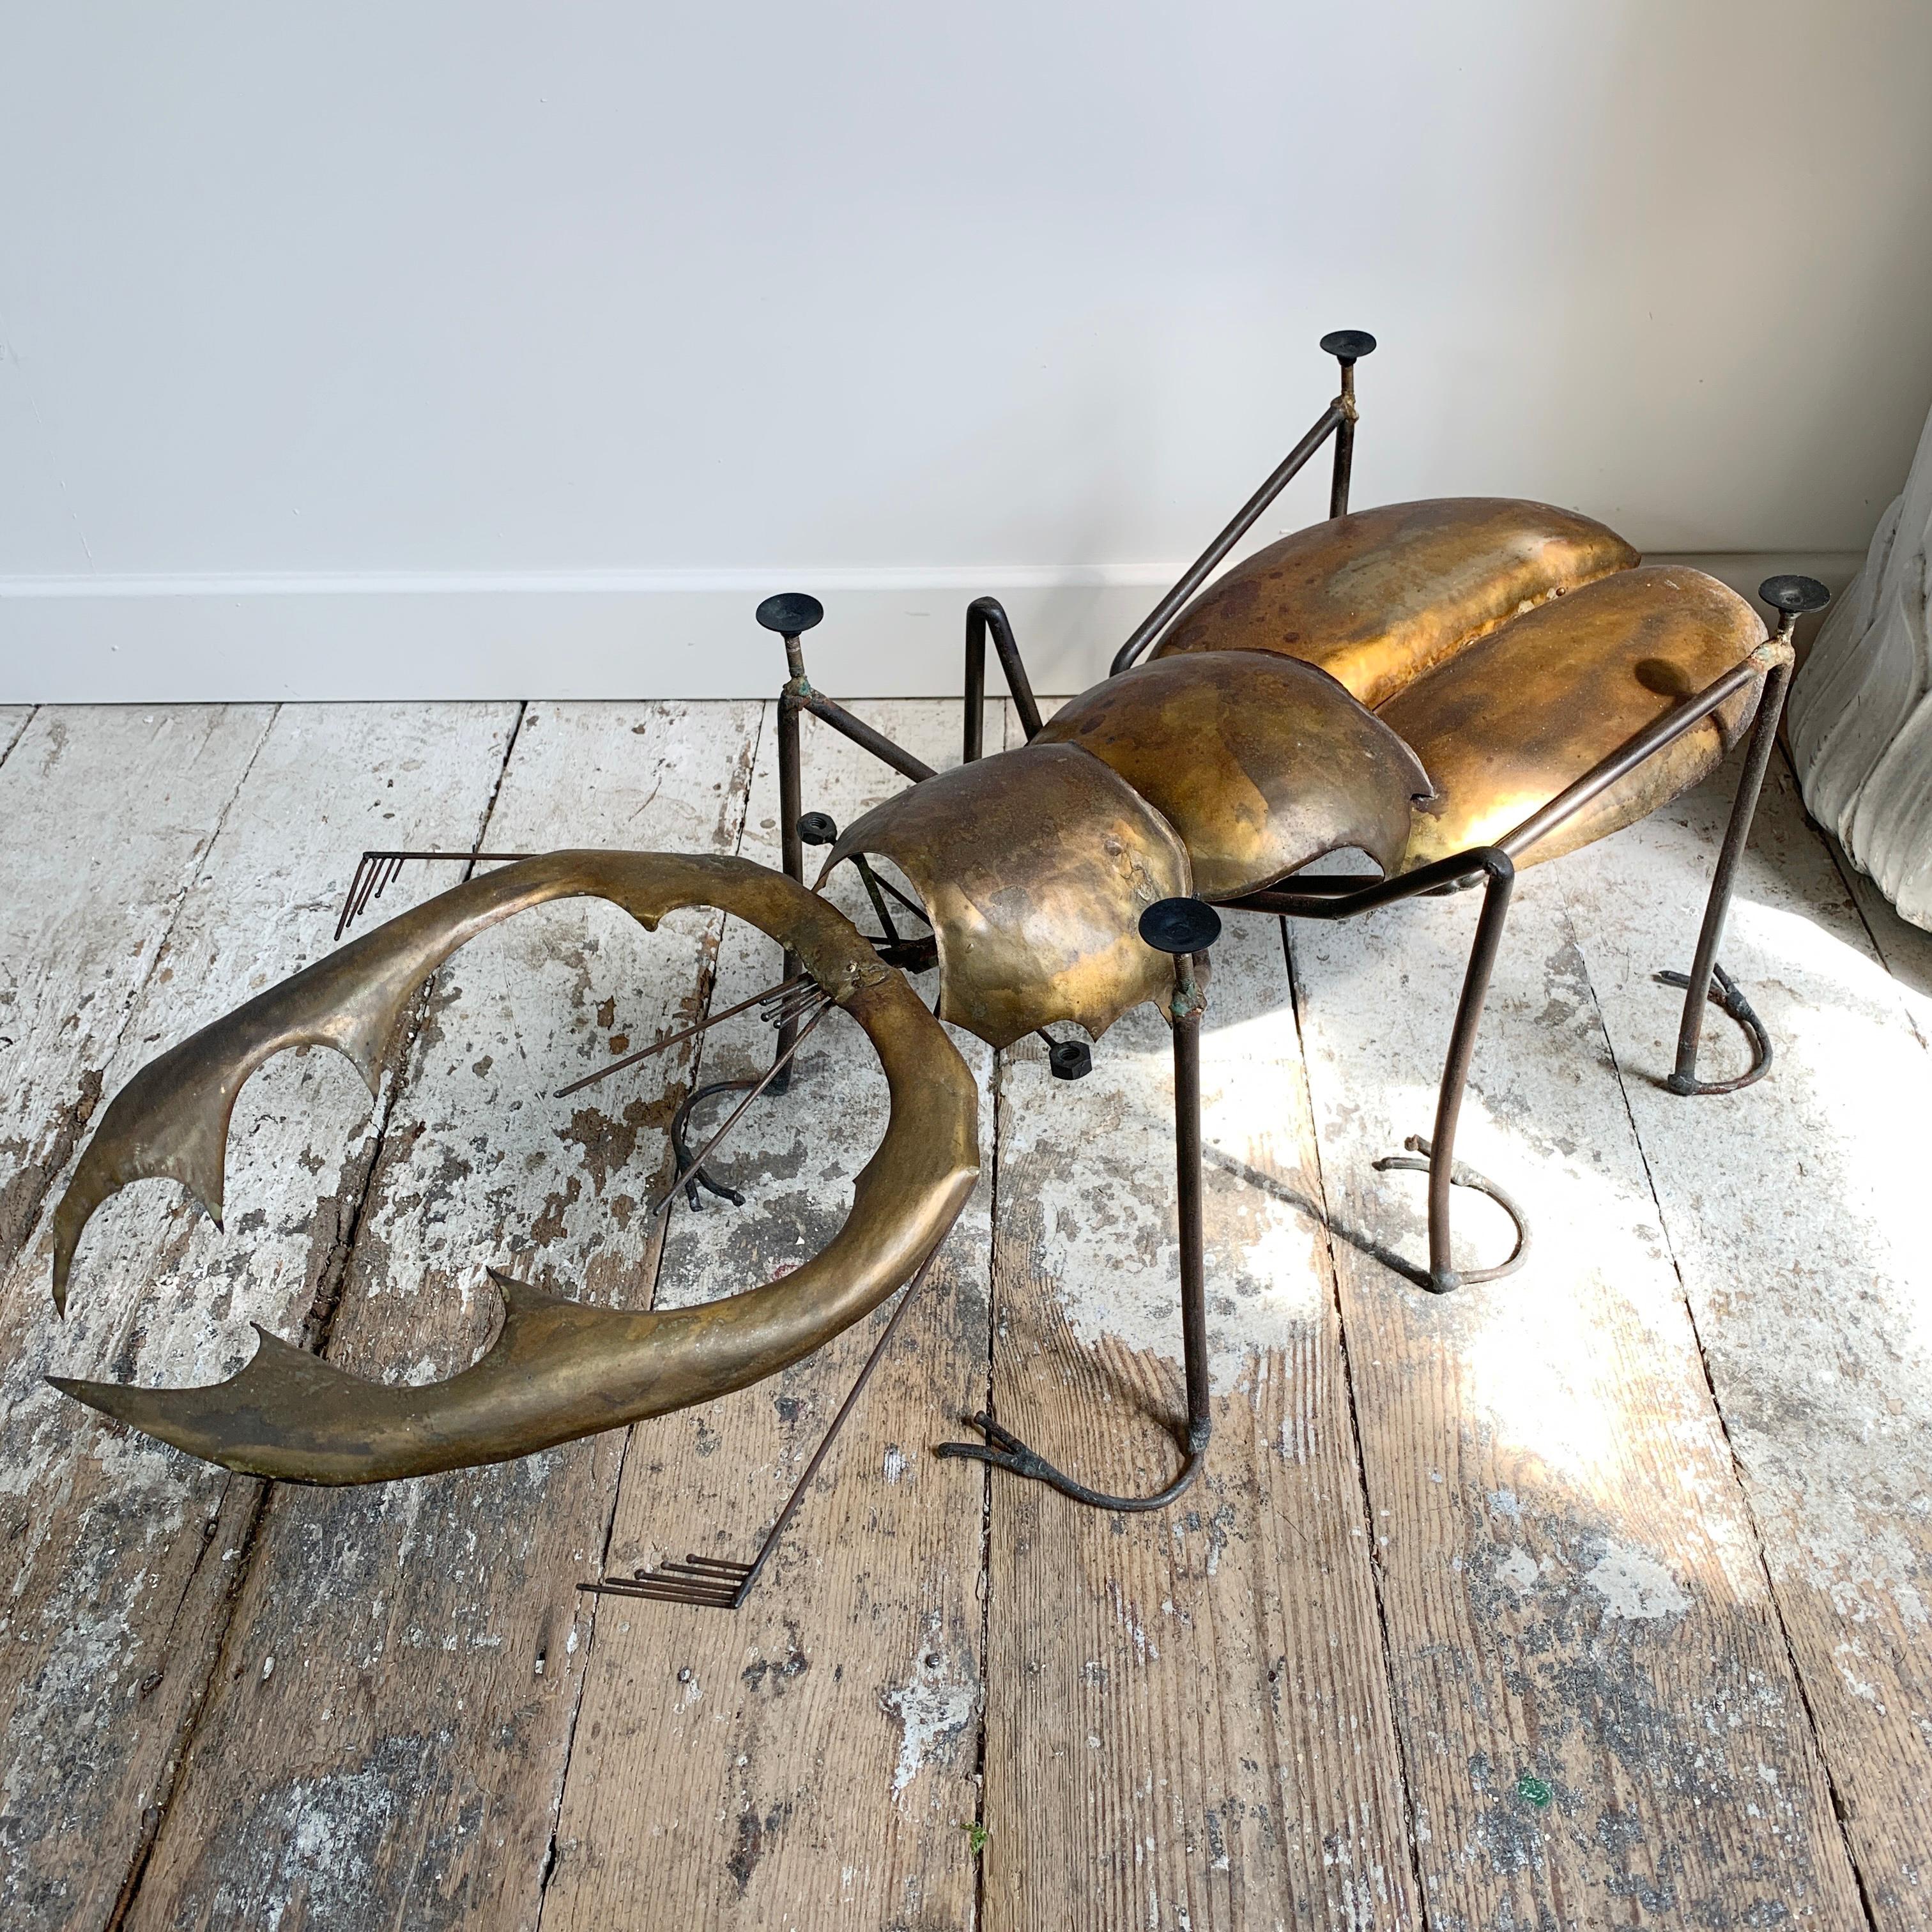 An exceptional brass and steel Stag Beetle table created and signed by the renowned French Sculptor and Artist, Francois Melin in the 1970s'. The table has been hand crafted by Melin using individual pieces of brass, shaped to form the various